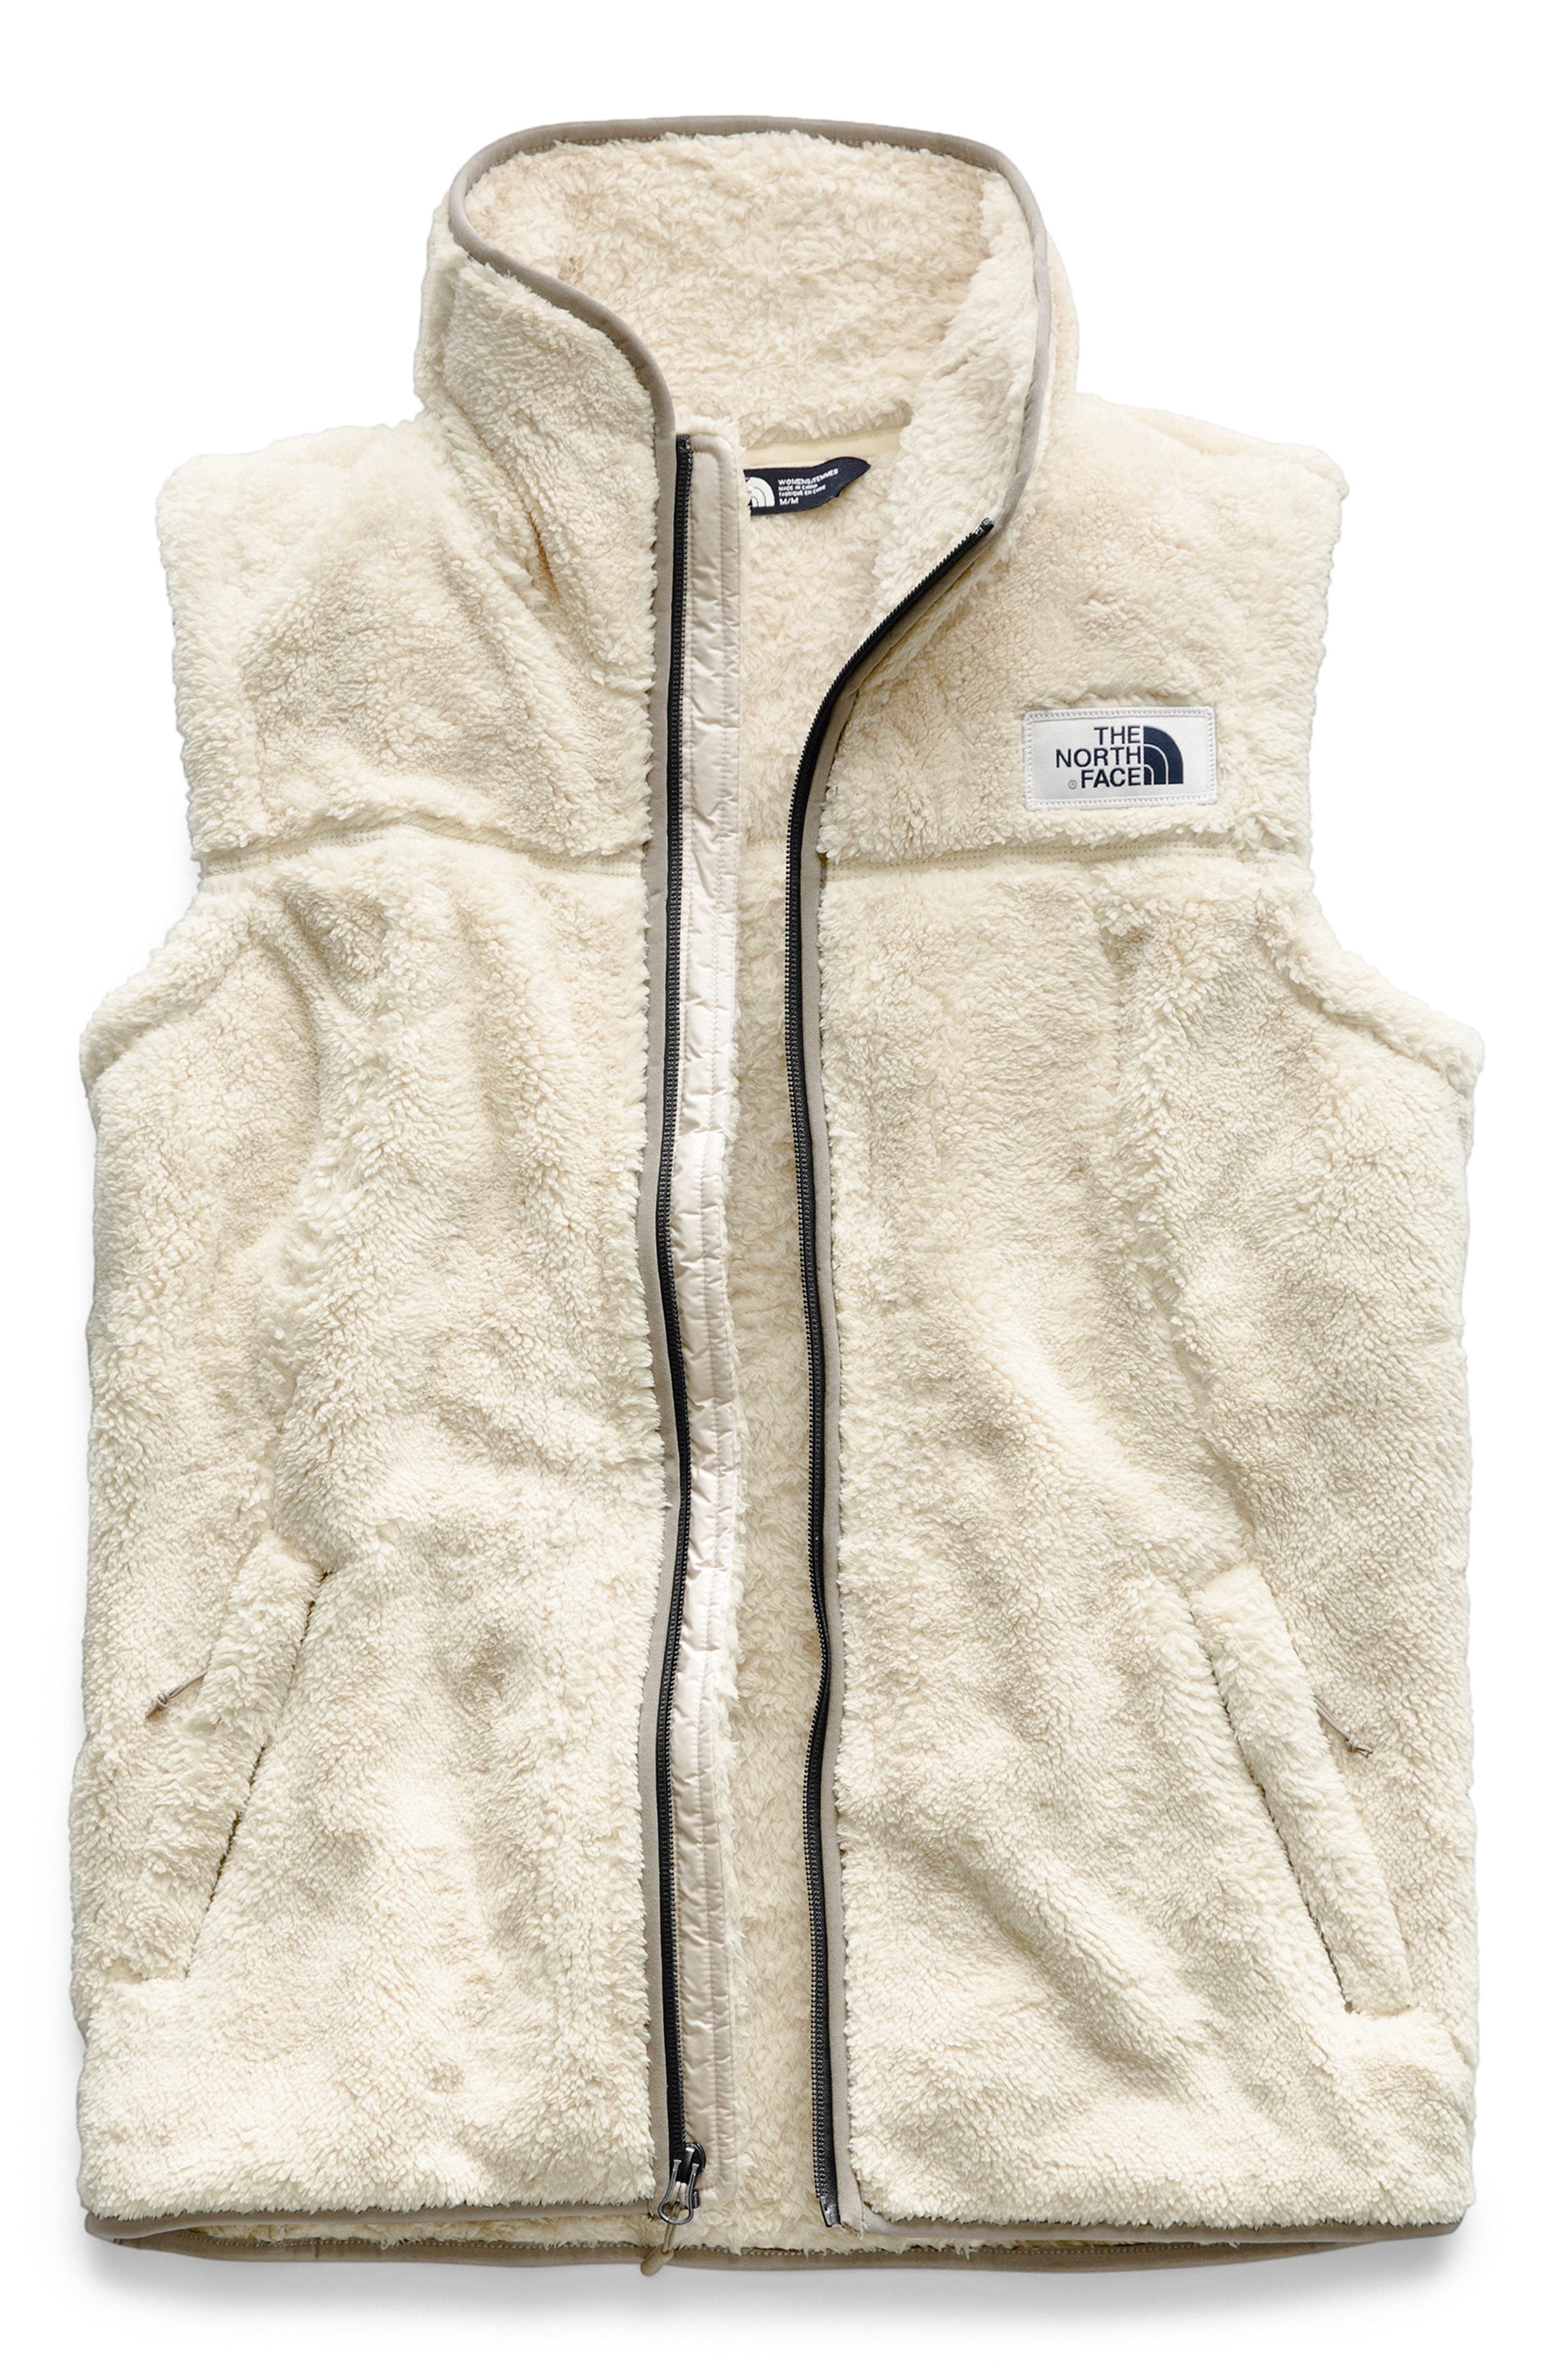 The North Face Campshire Fleece Vest 